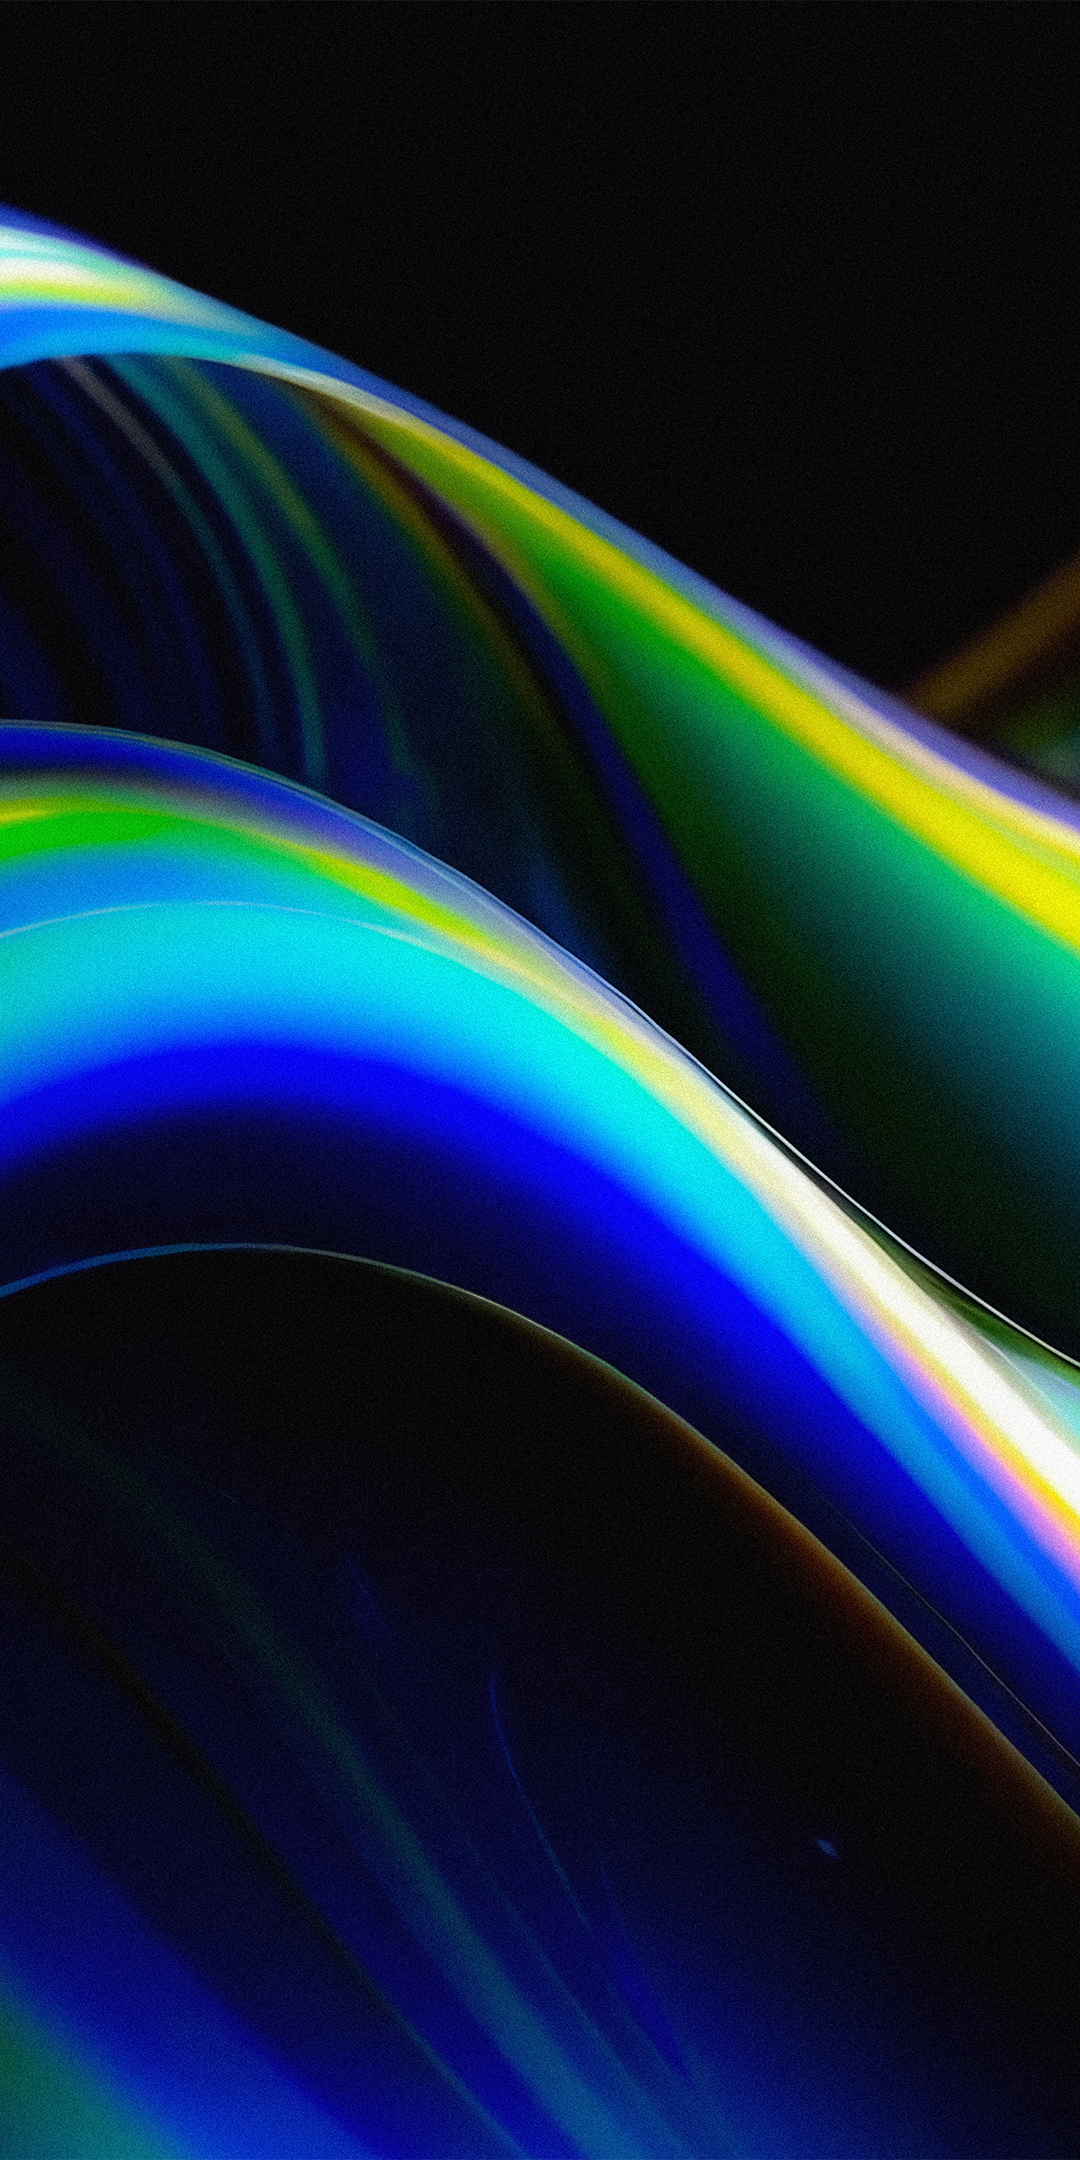 Wavy surface, abstract, colorful pattern, 1080x2160 wallpaper